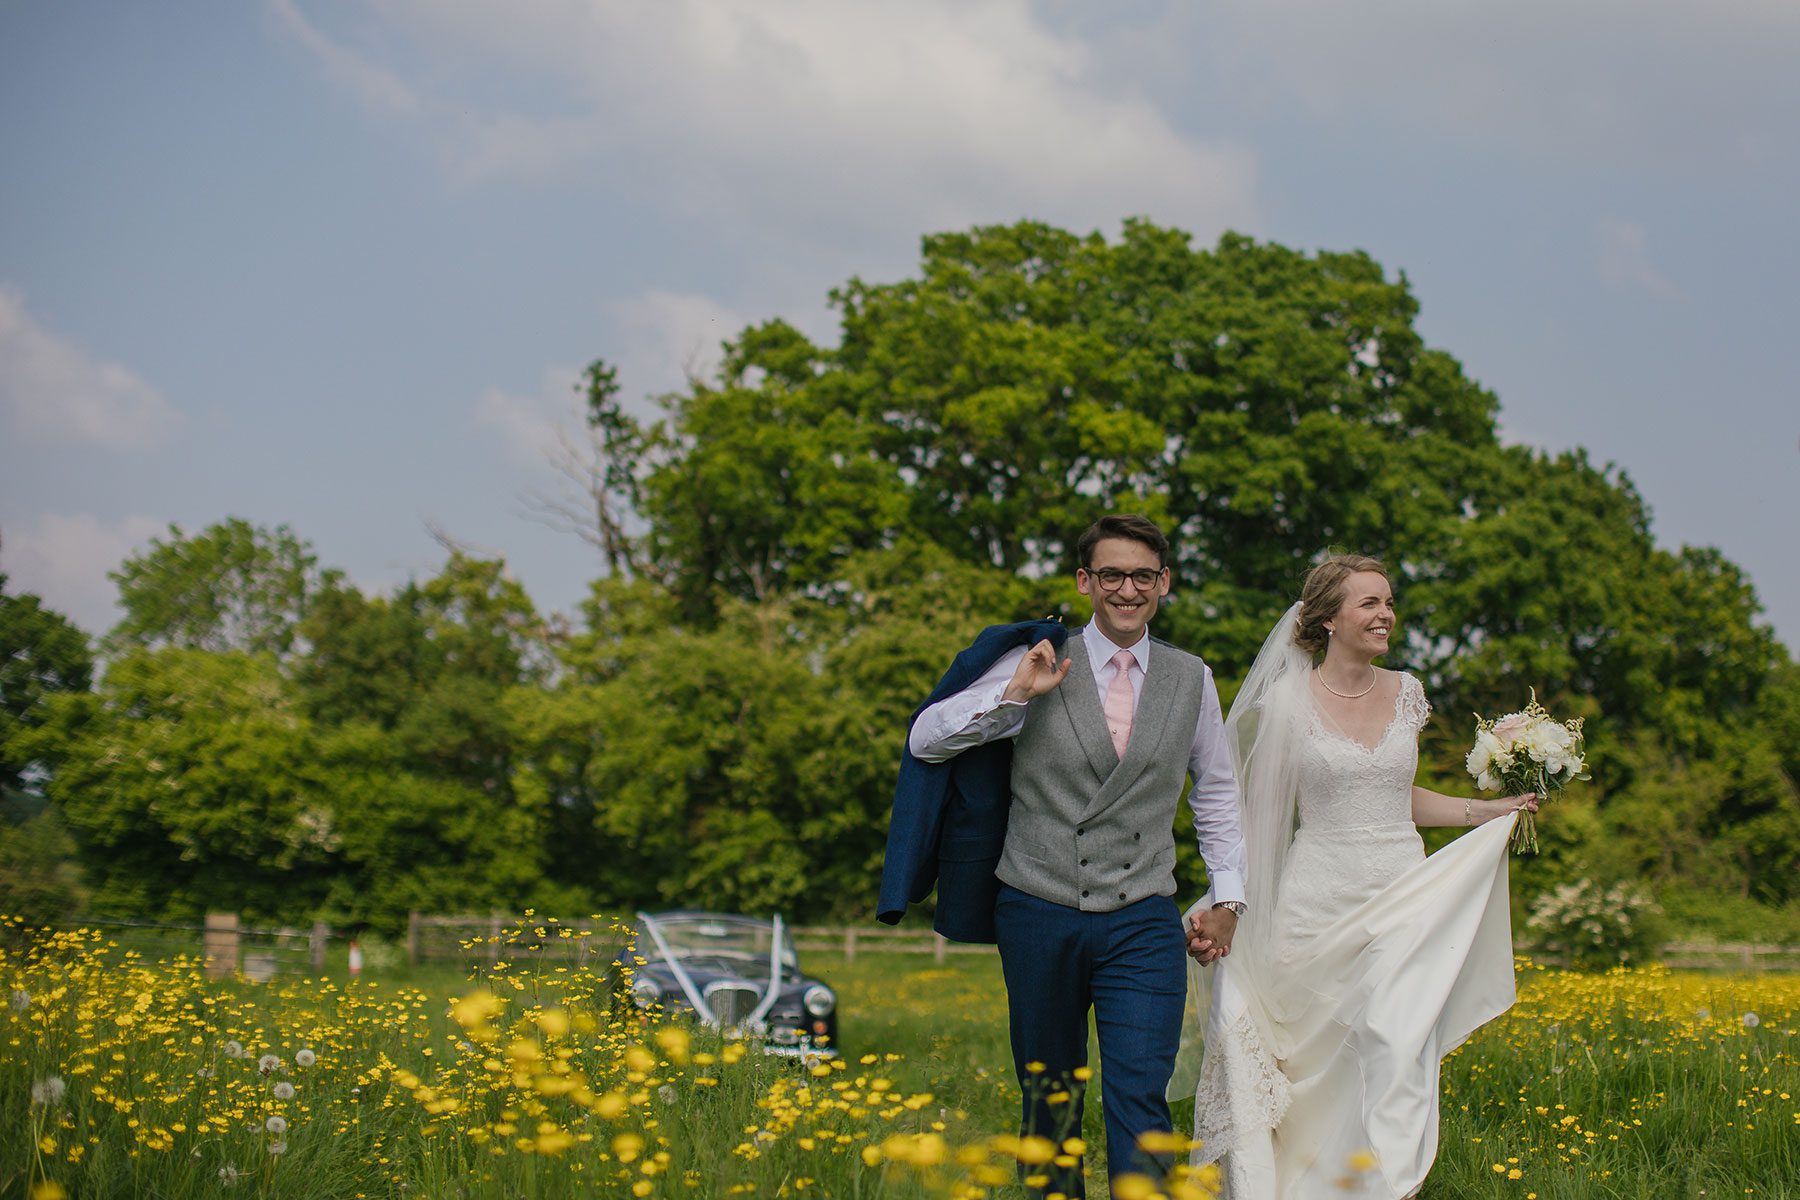 The views from Crippetts Barn - Reportage Wedding Photography in Cheltenham, Gloucestershire & the Cotswolds | Bullit Photography.